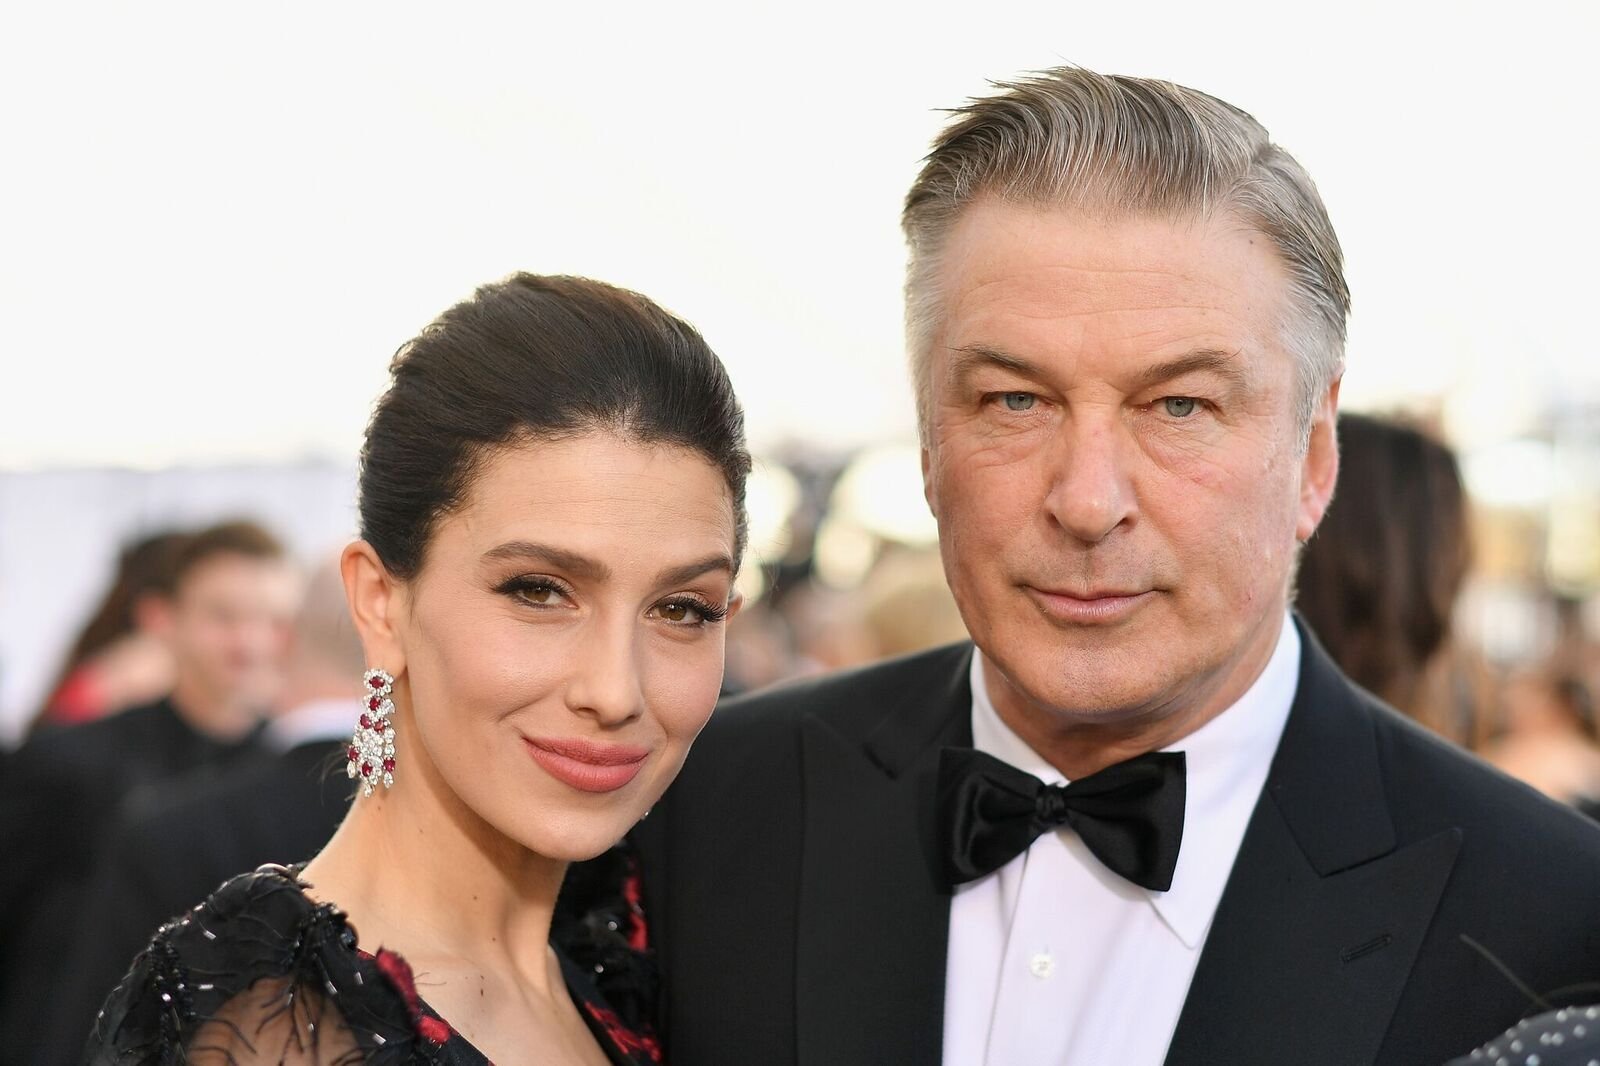 Hilaria Baldwin and Alec Baldwin attend the 25th Annual Screen Actors Guild Awards at The Shrine Auditorium on January 27, 2019. | Source: Getty Images